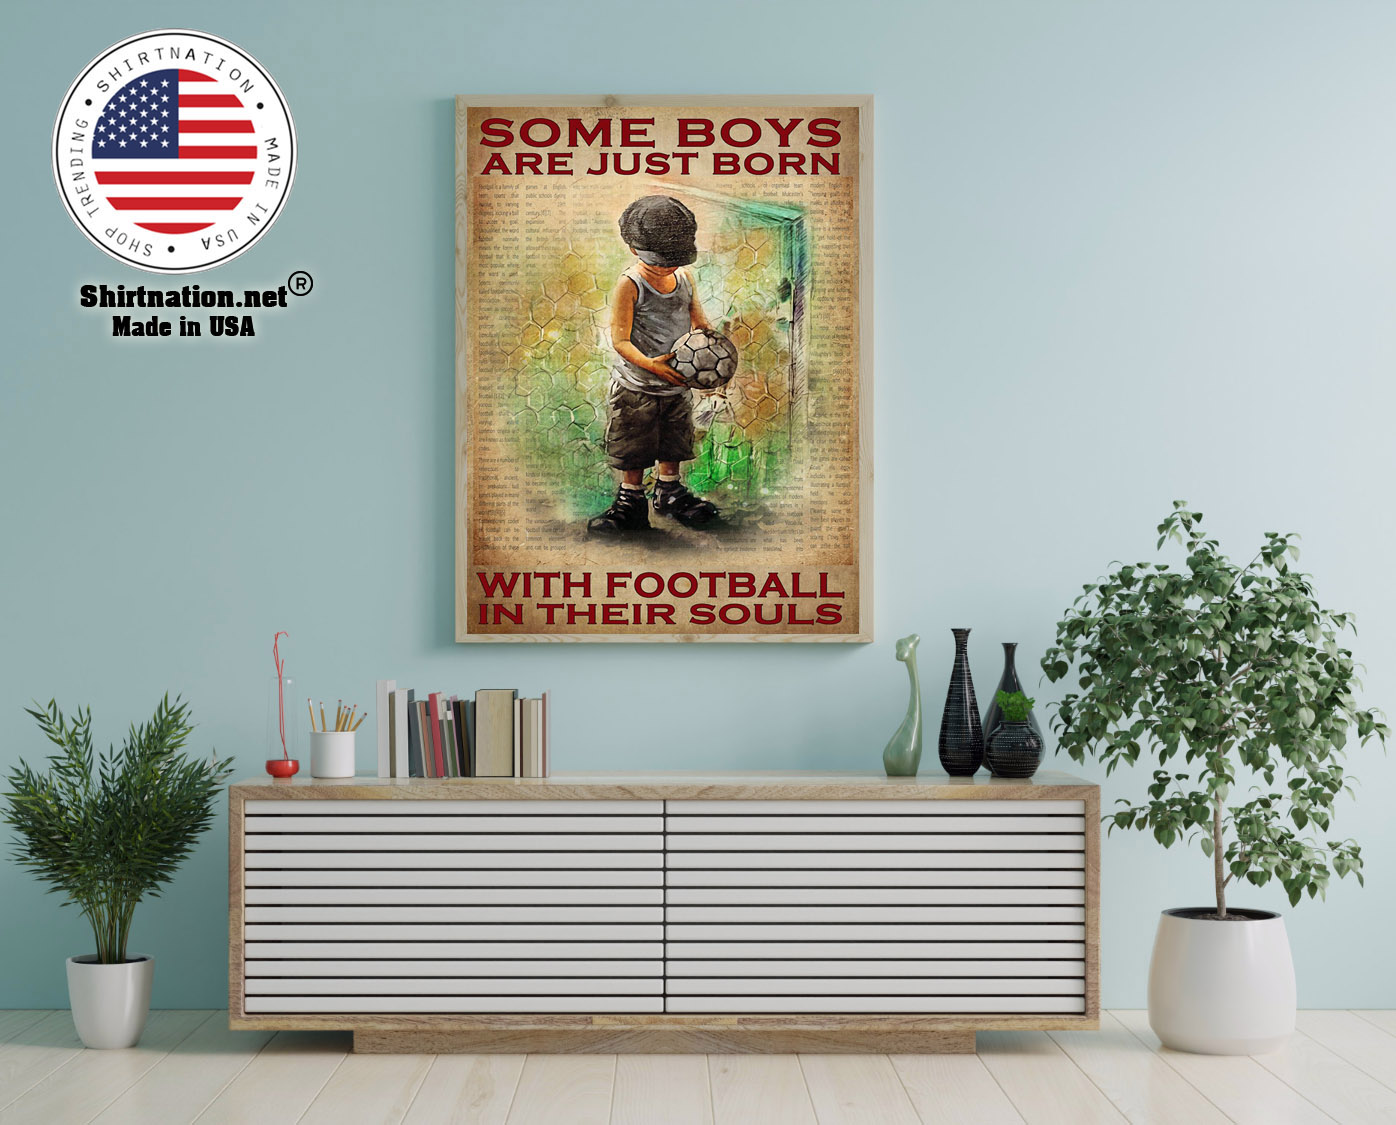 Some boys are just born with football in their souls poster 12